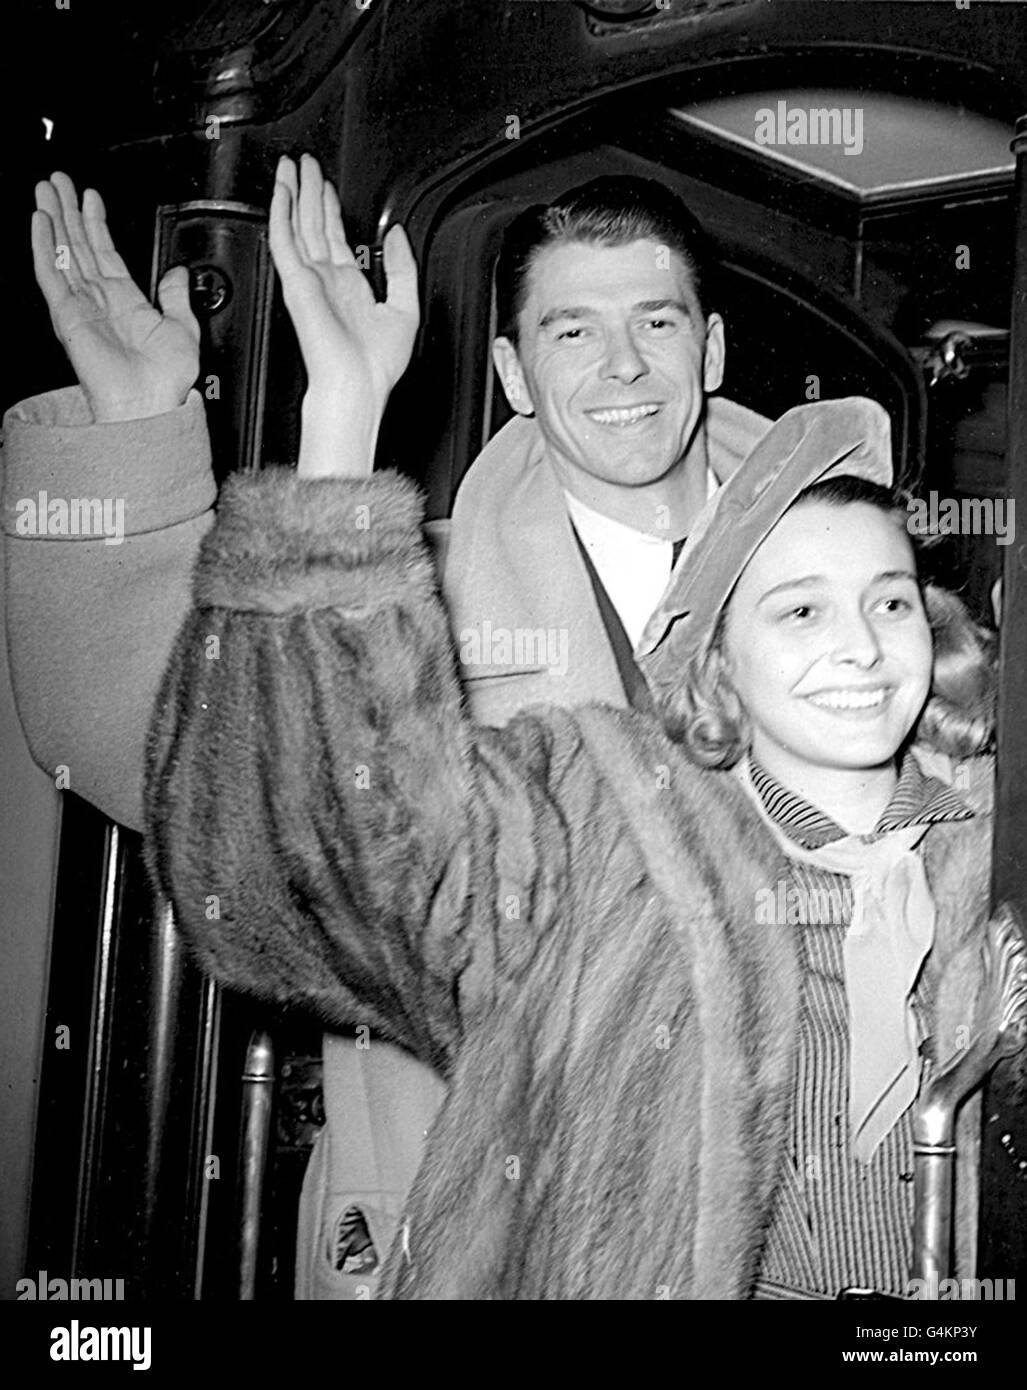 Actor Ronald Reagan with Patricia Neal, his co-star in the film 'The Hasty Heart,' leaving Waterloo Station, London. *05/06/04: Former US President Ronald Reagan has died a family friend said. Stock Photo